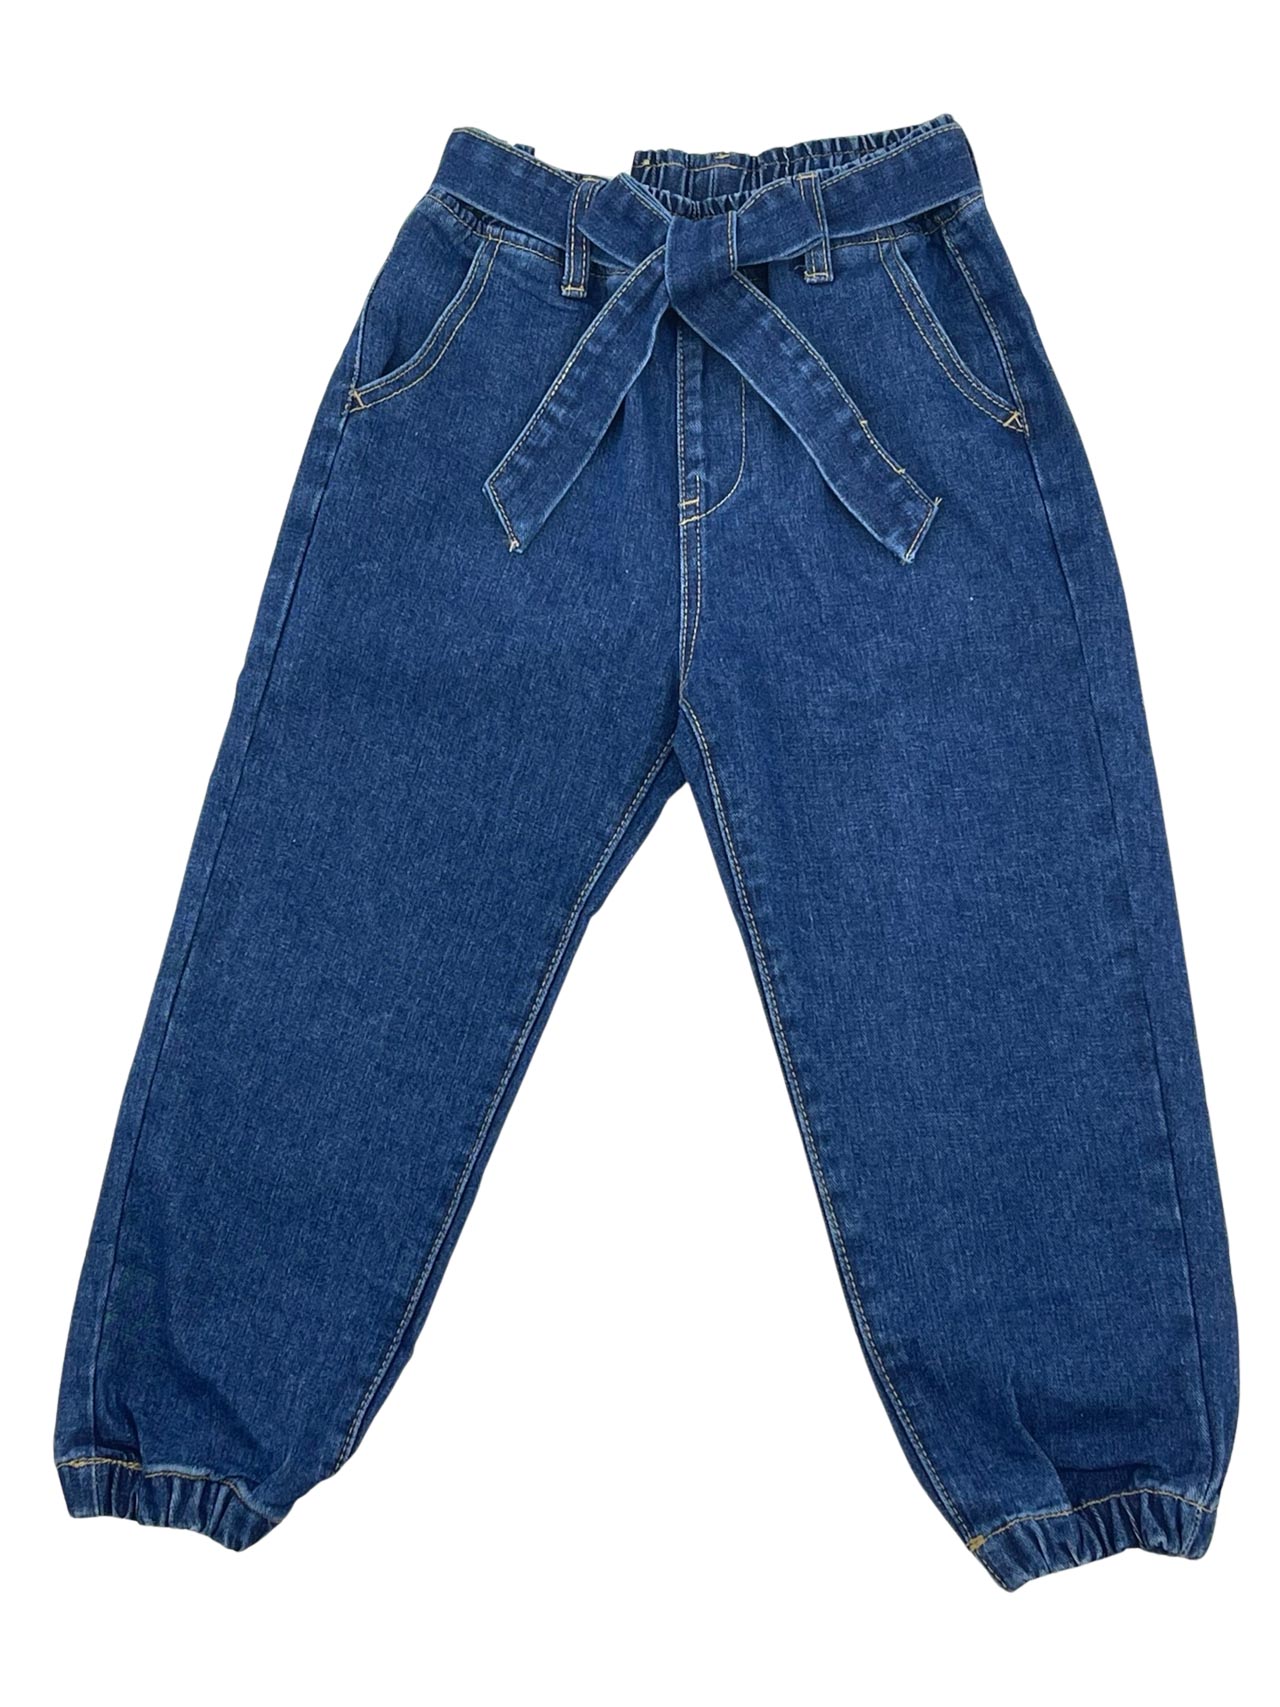 Girl's jeans with elastic waistband code GB9348 front view